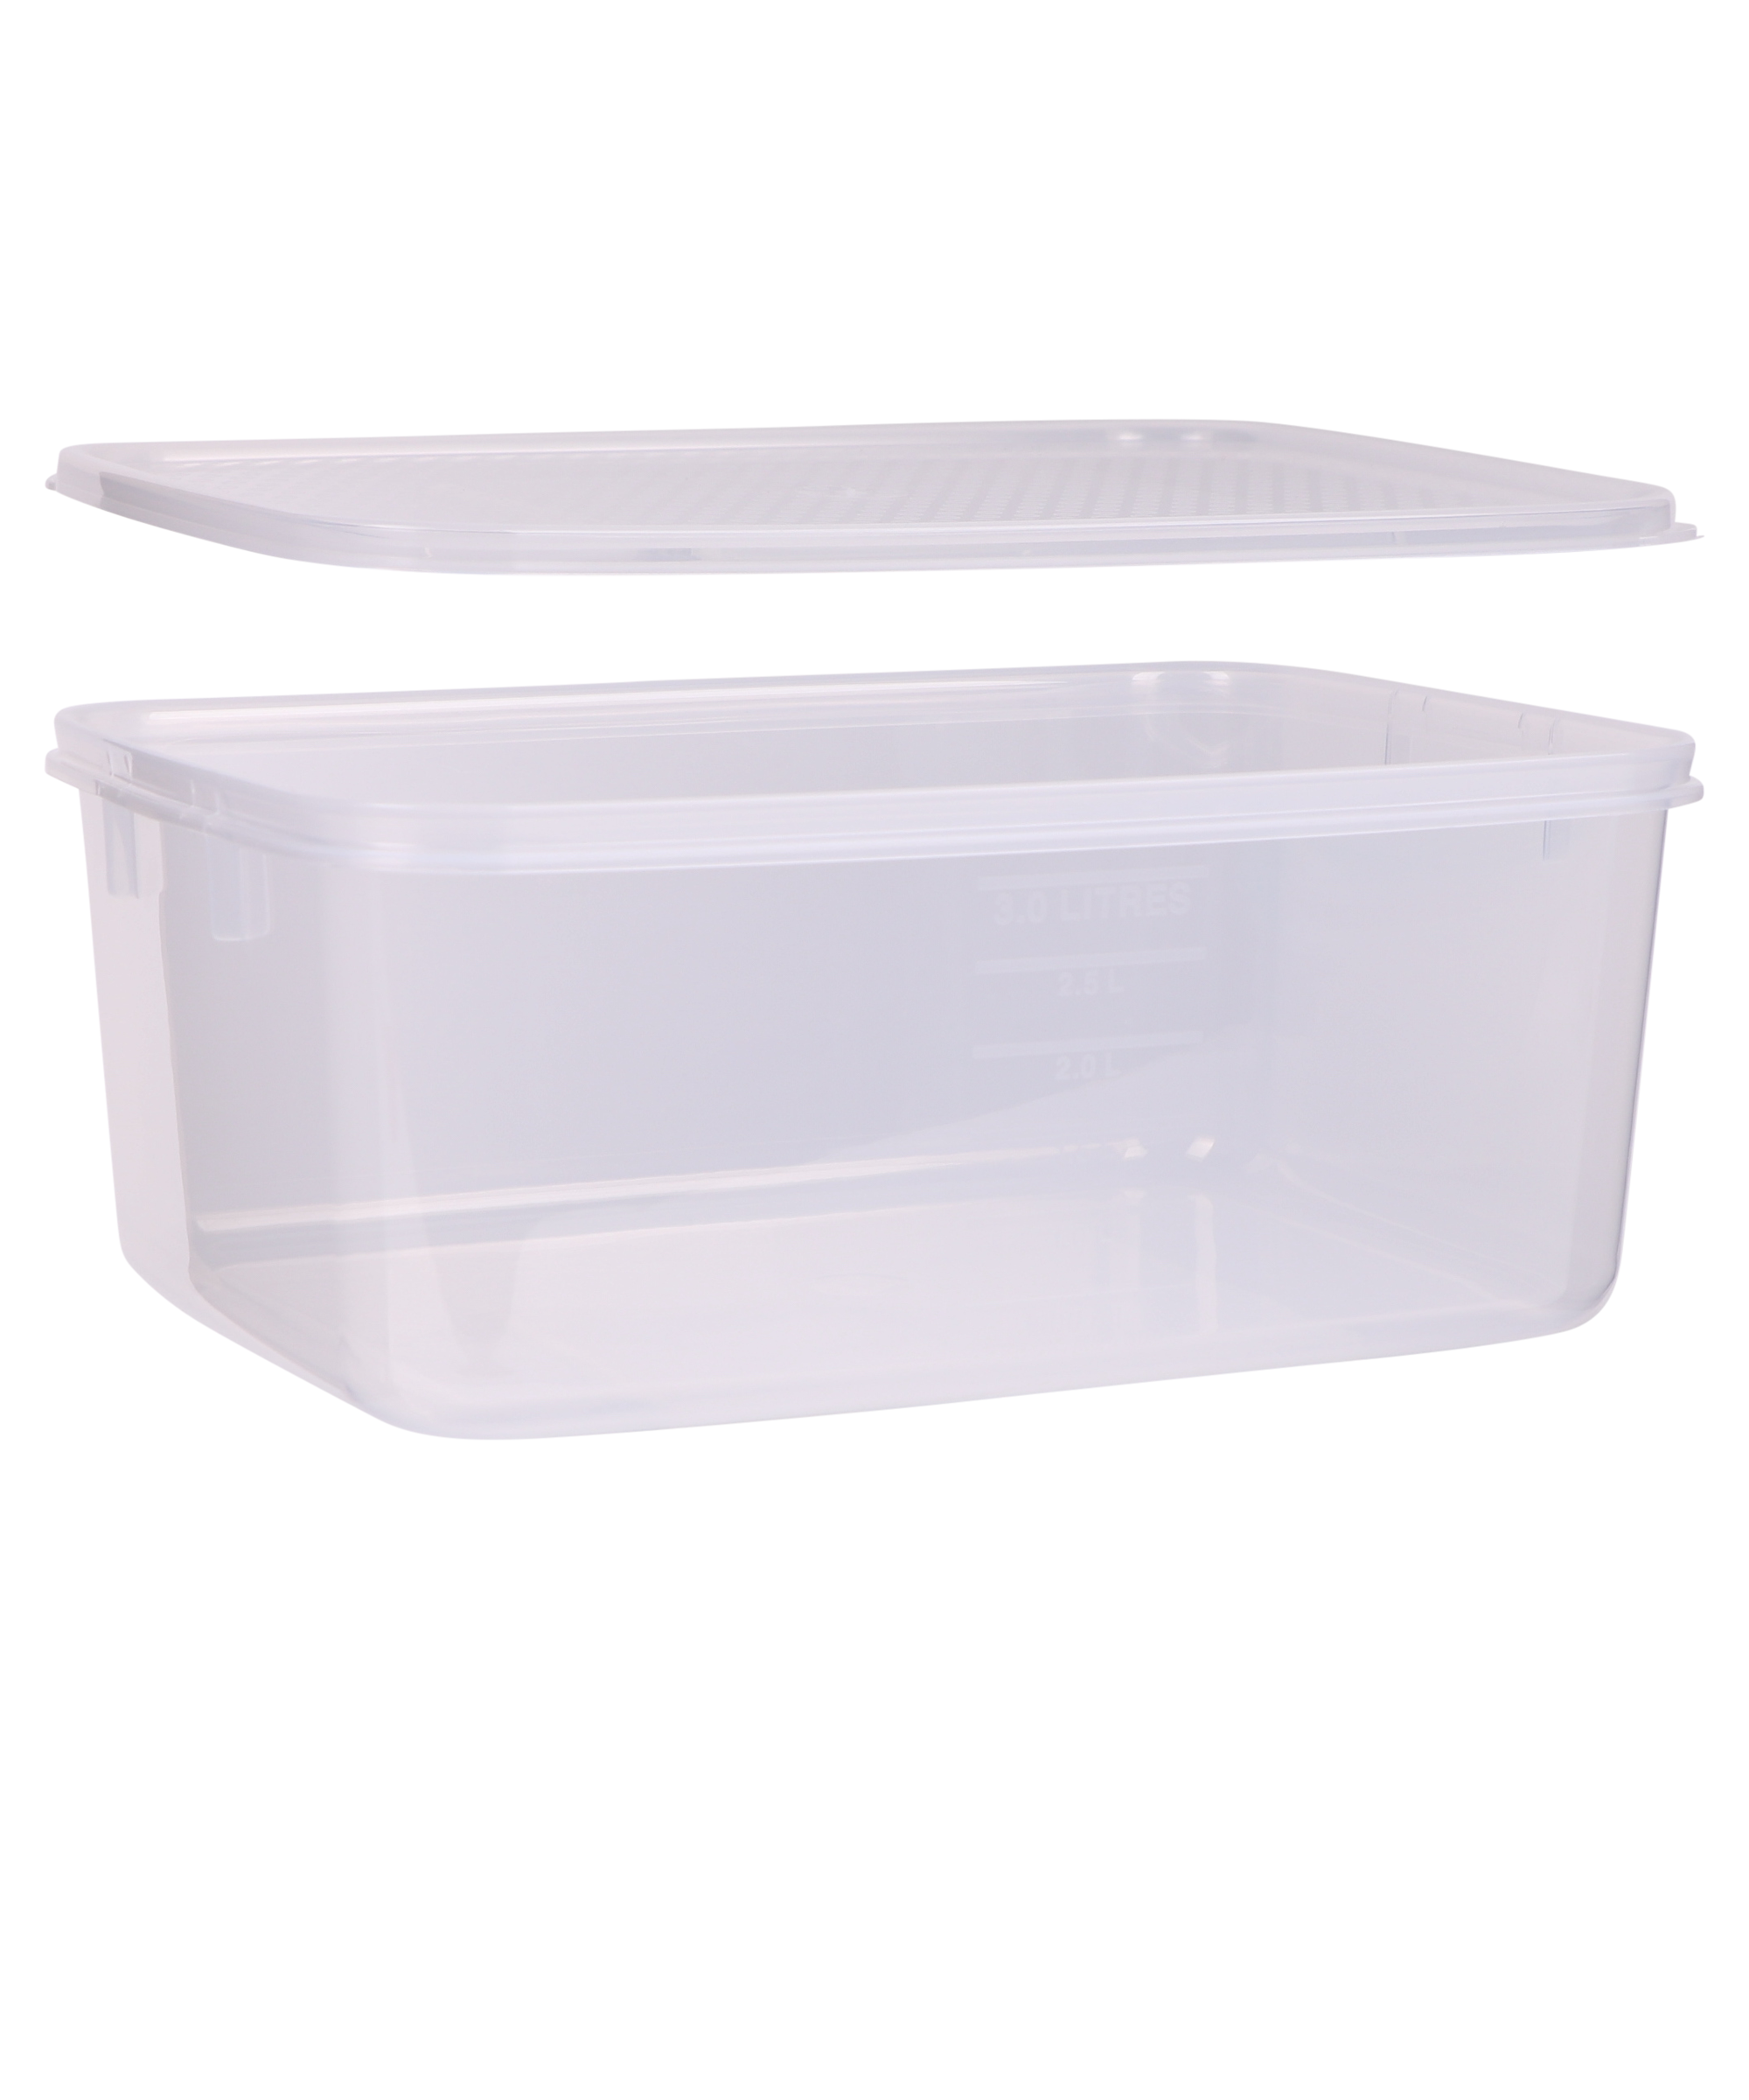 Food Container, Oblong, 3L, Set